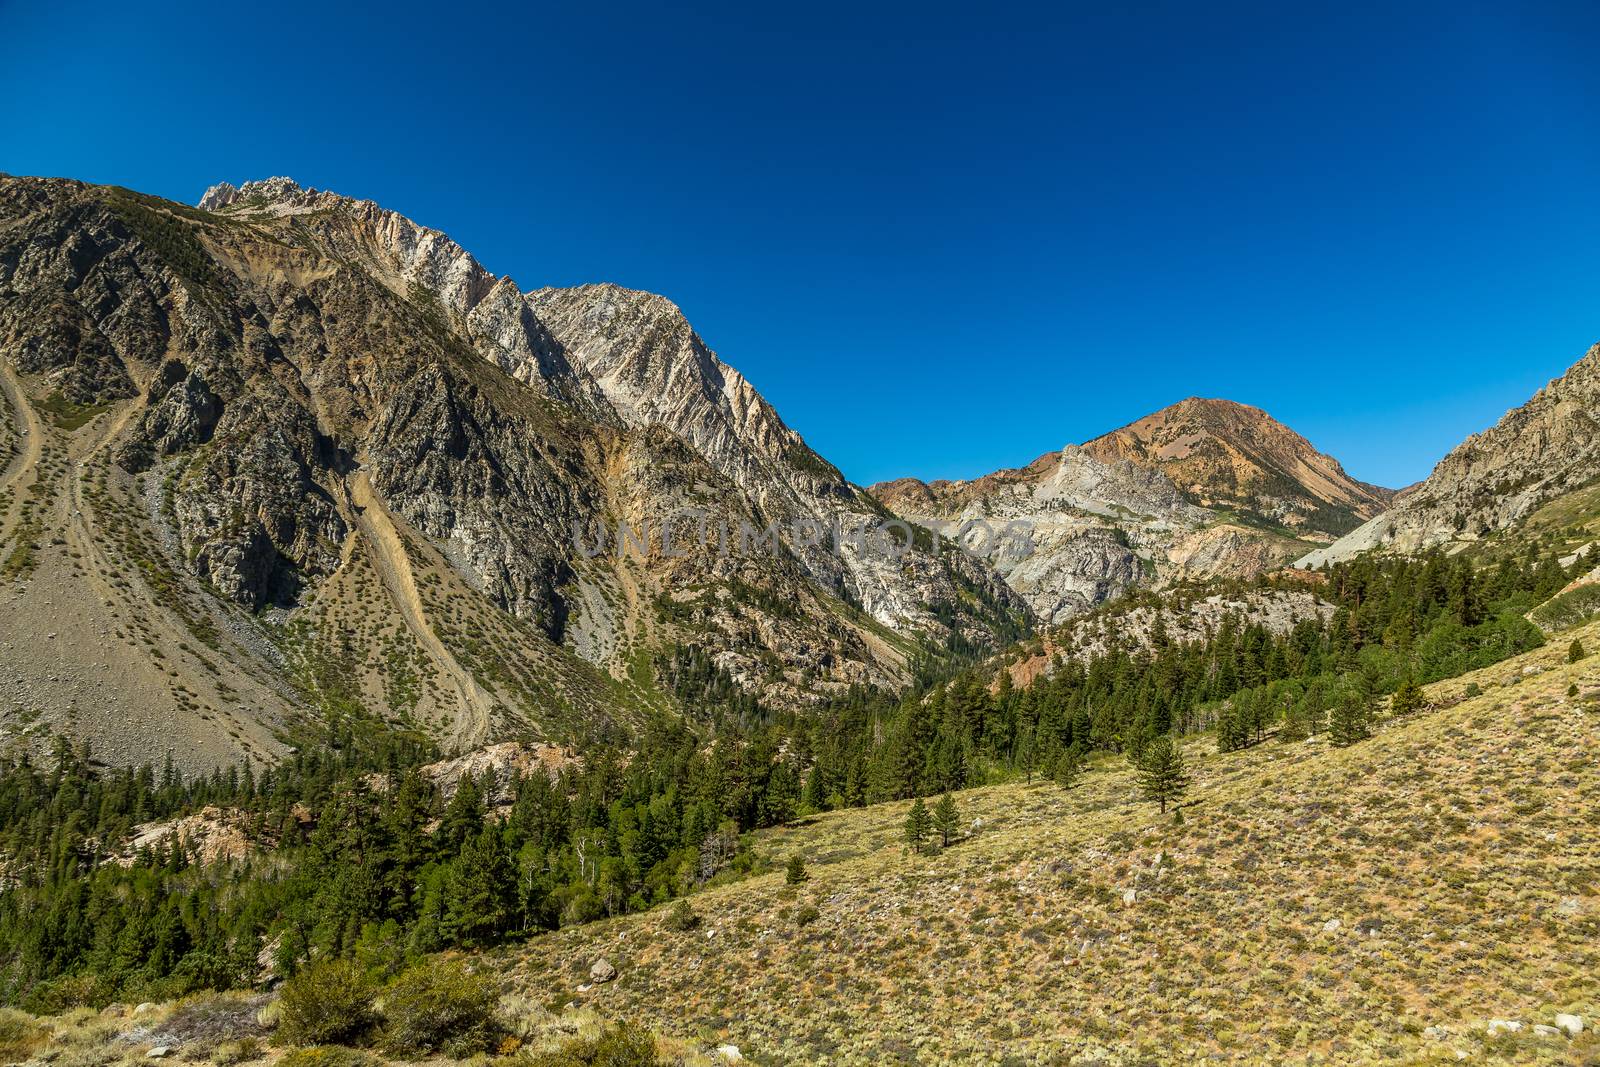 Tioga Pass by adifferentbrian